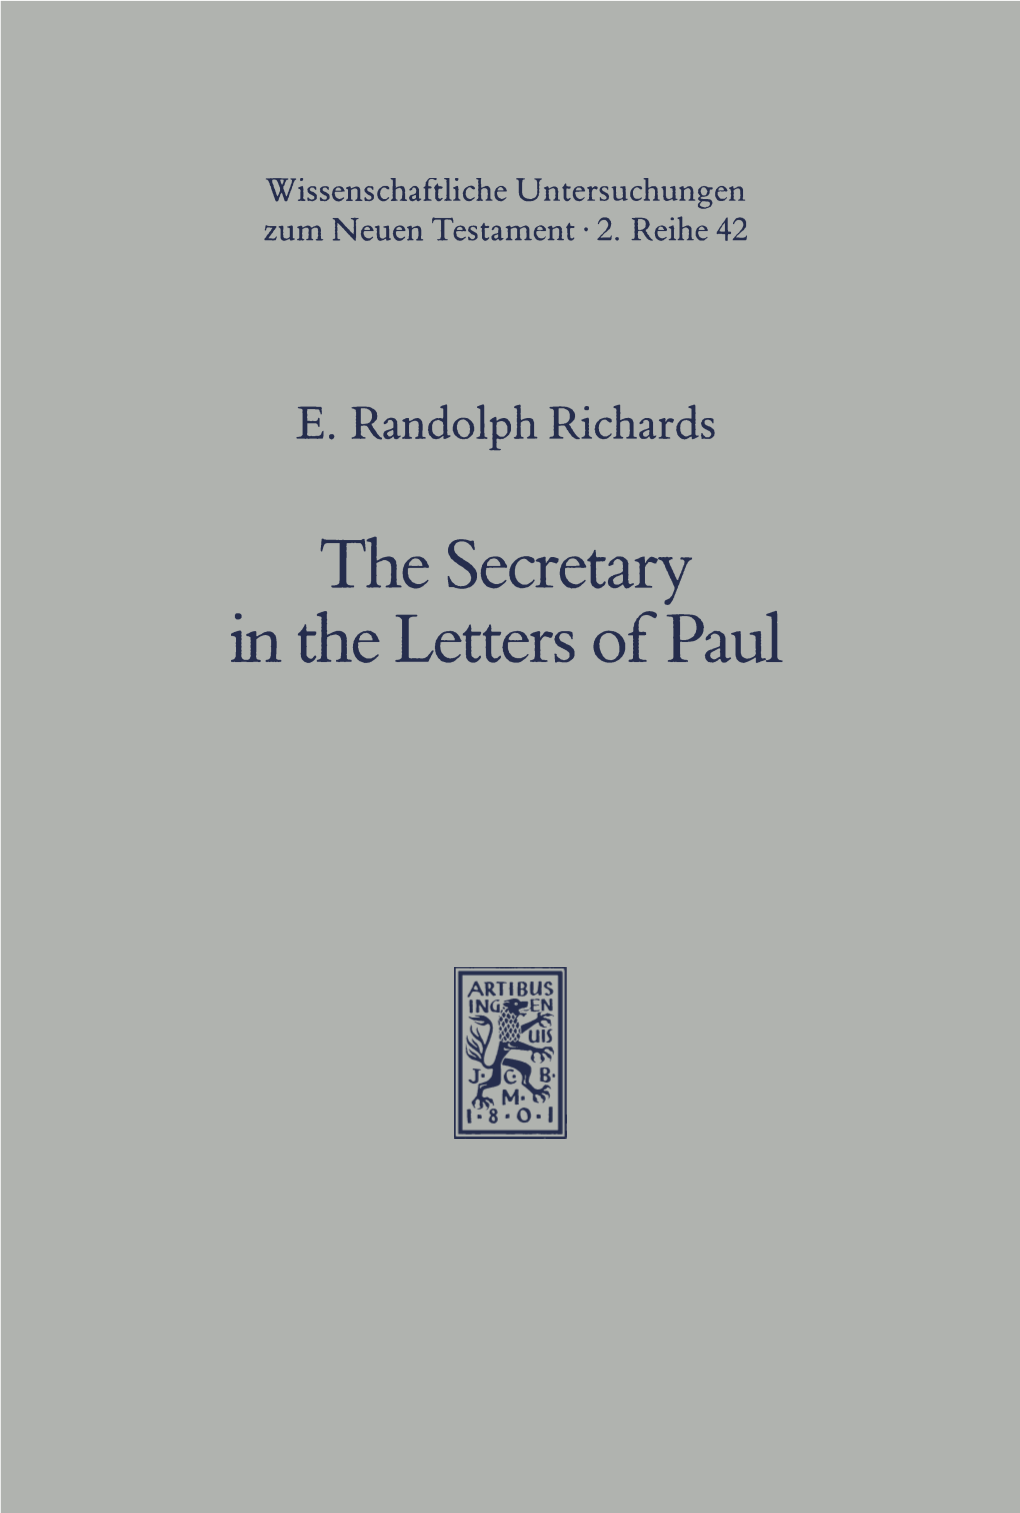 The Secretary in the Letters of Paul